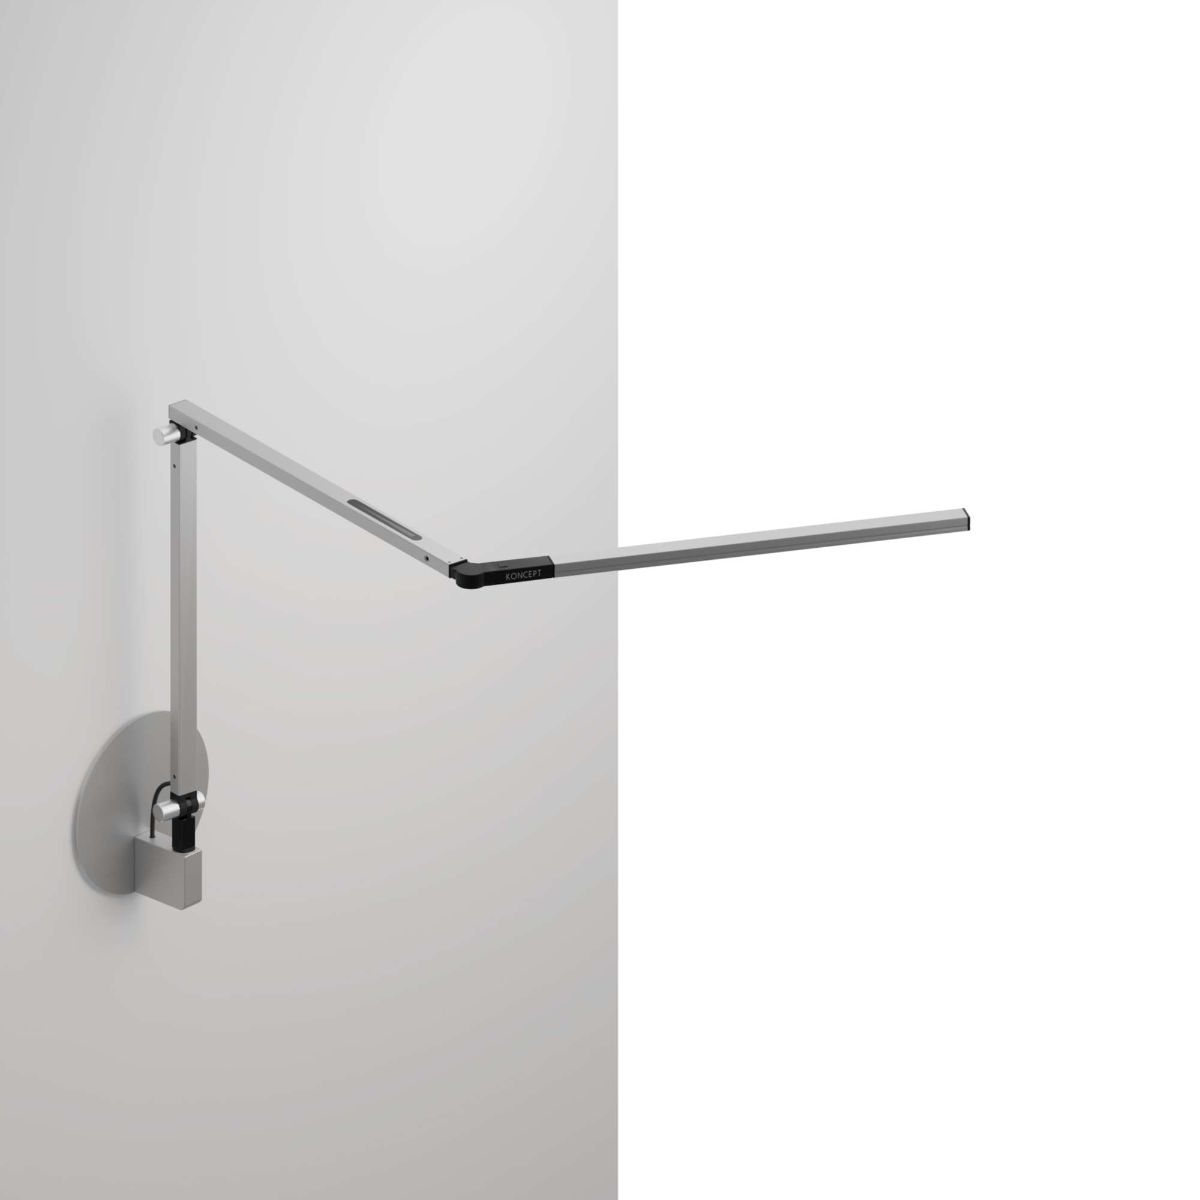 Z-Bar Mini Contemporary Hardwired wall mount LED Swing Arm Wall Lamp Cool White Light